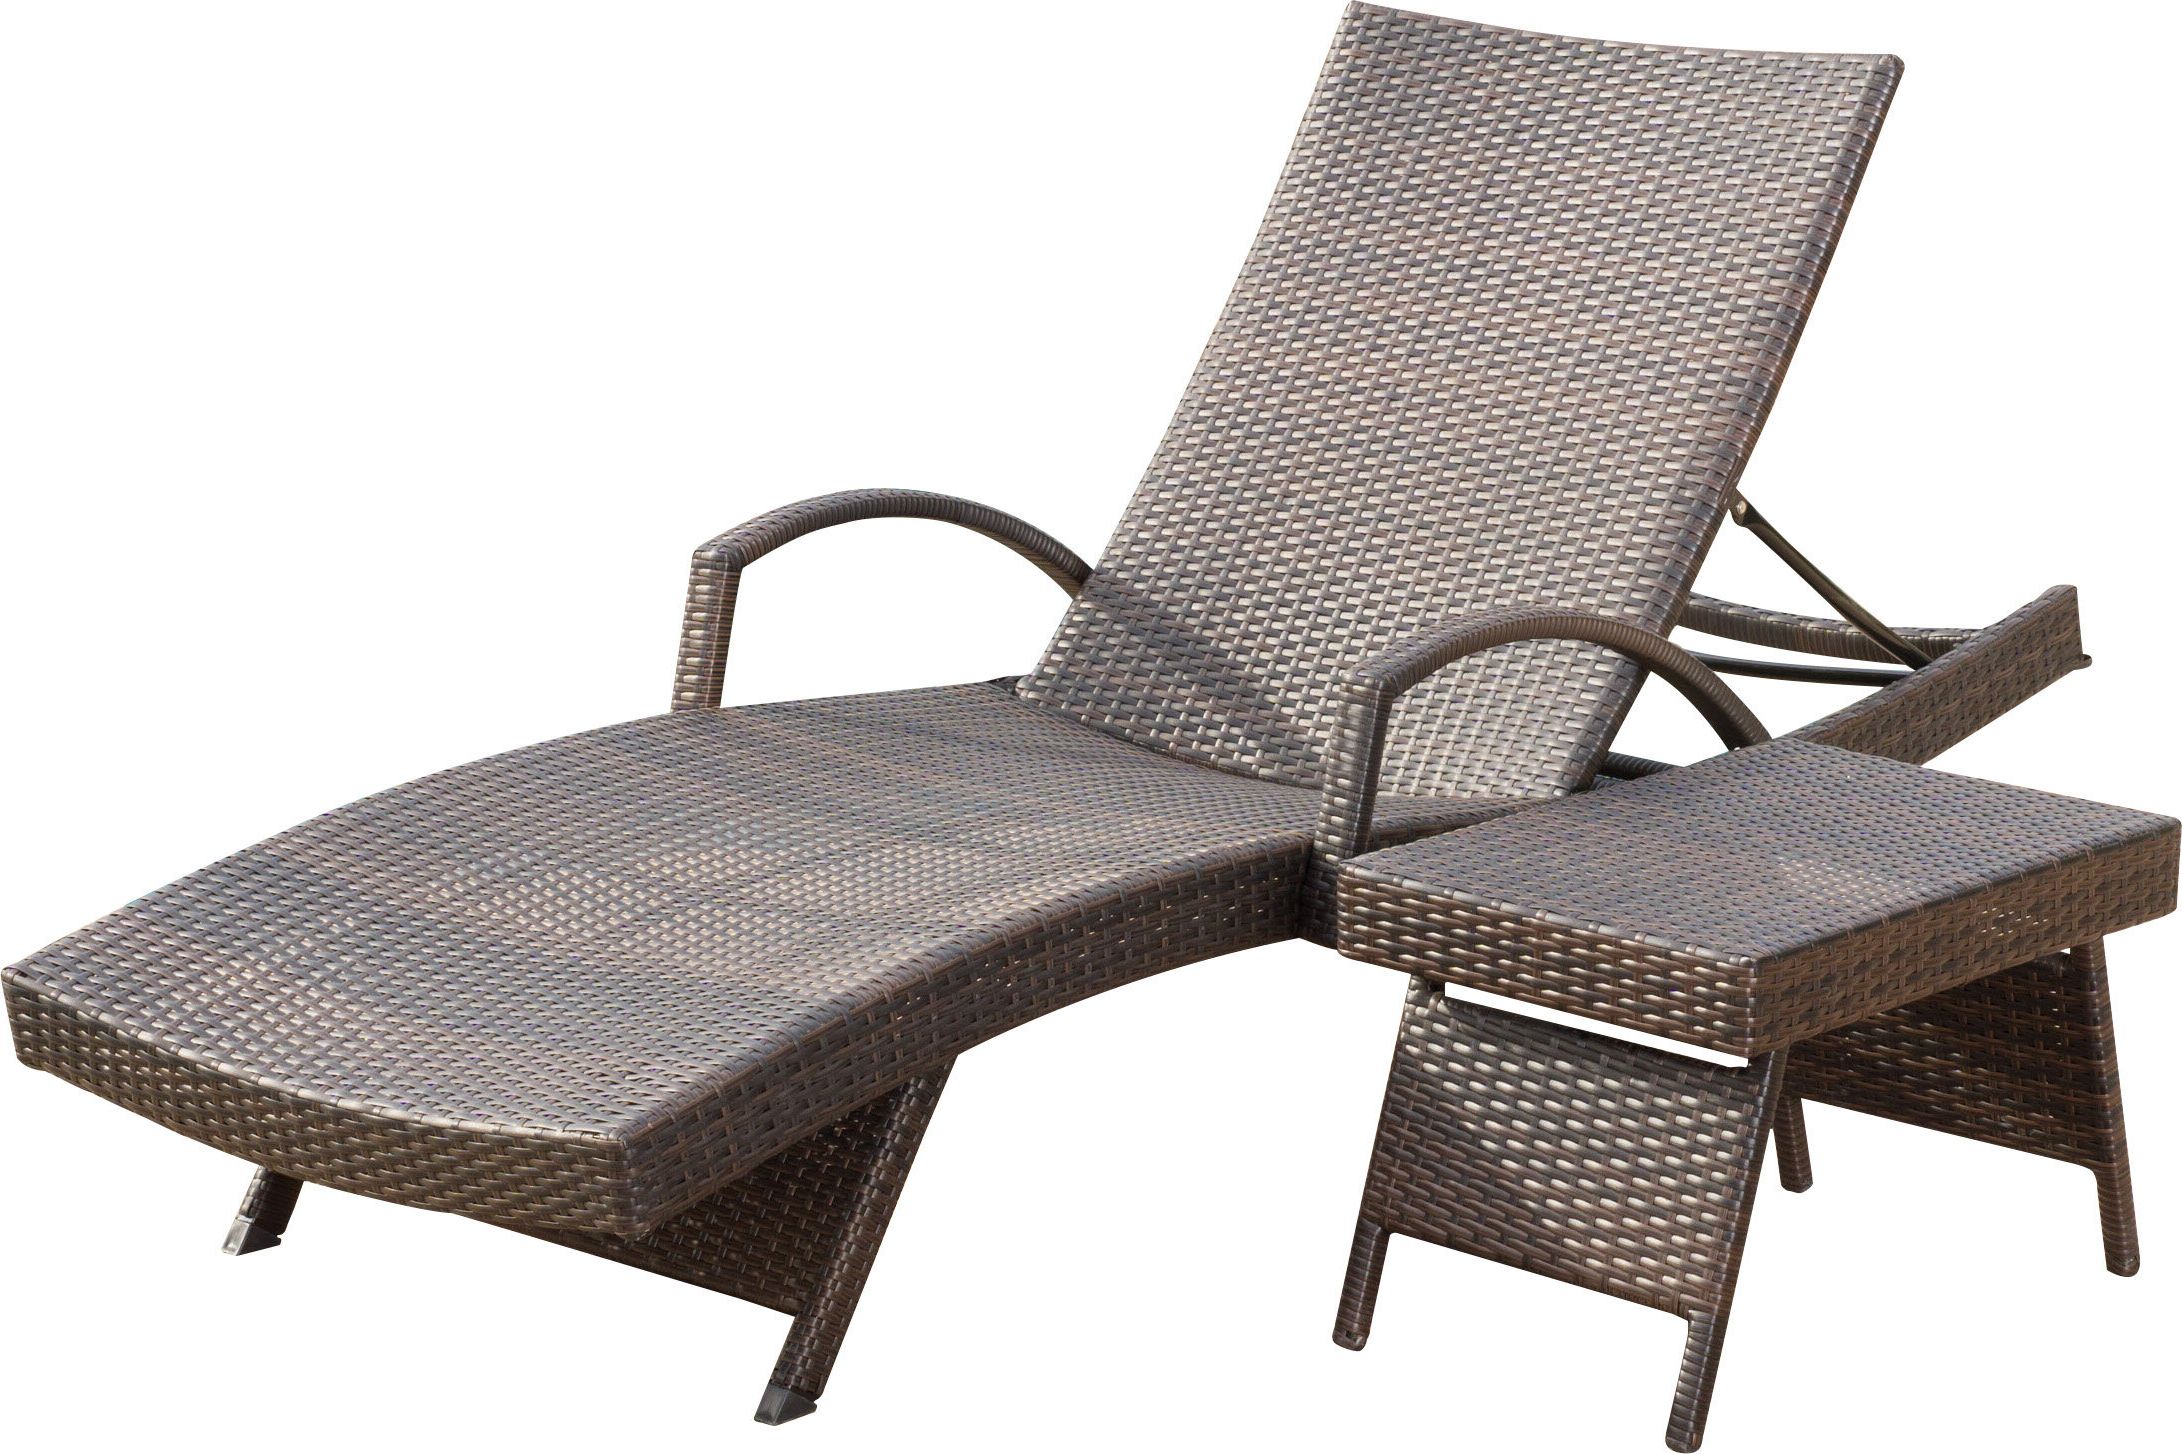 Trendy Outdoor Adjustable Reclining Wicker Chaise Lounges Intended For Rebello Adjustable Wicker Reclining Chaise Lounge With Table (View 6 of 25)